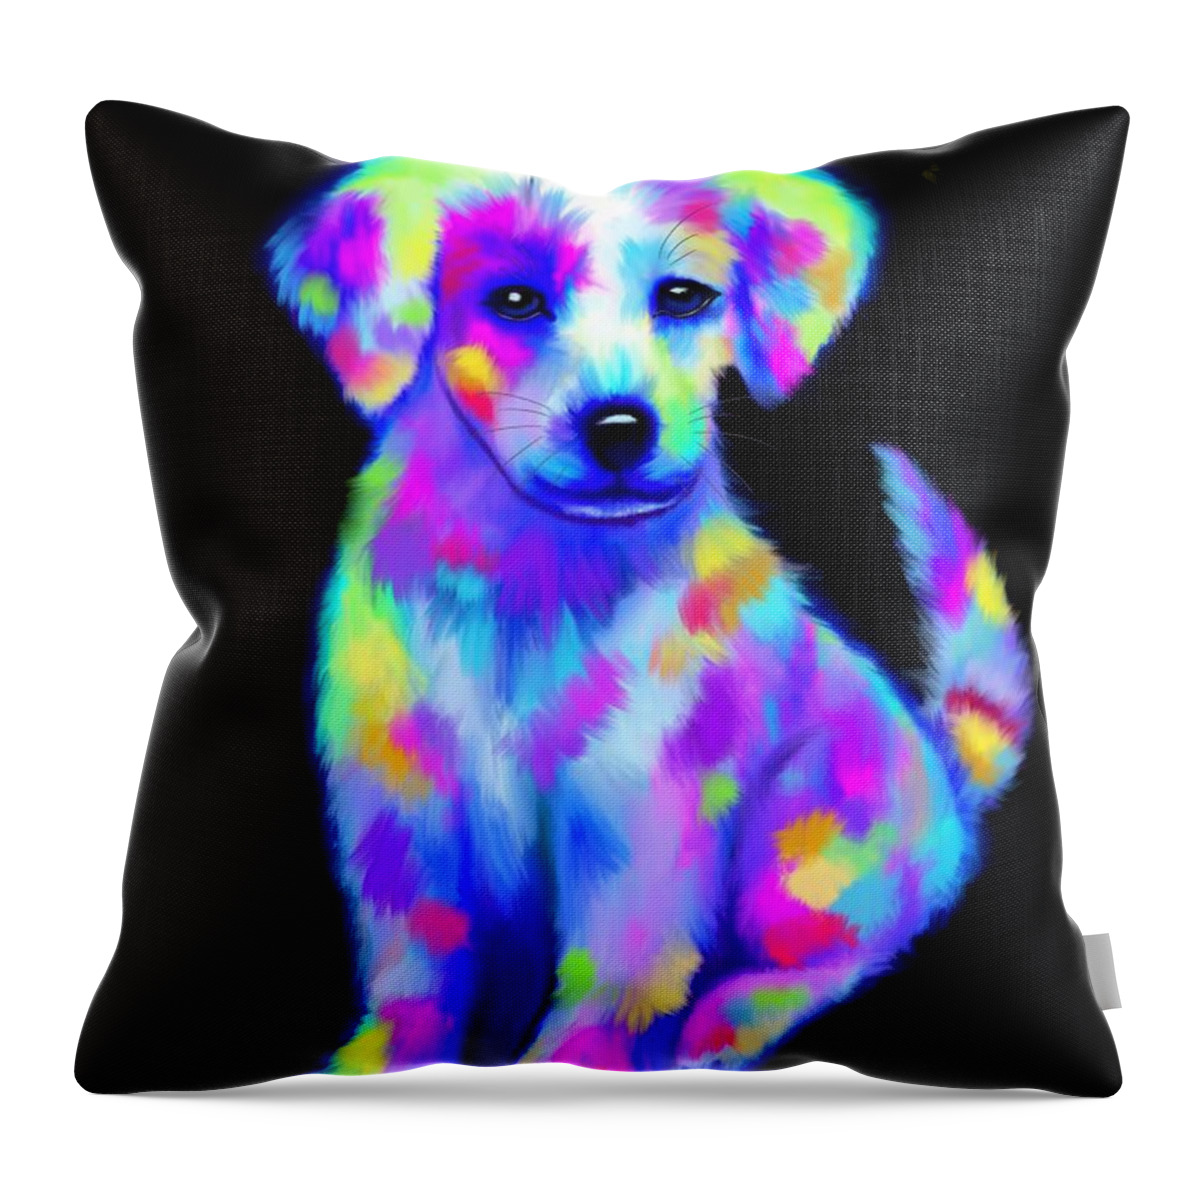 Colorful Critter Throw Pillow featuring the painting Painted Pup 2 by Nick Gustafson